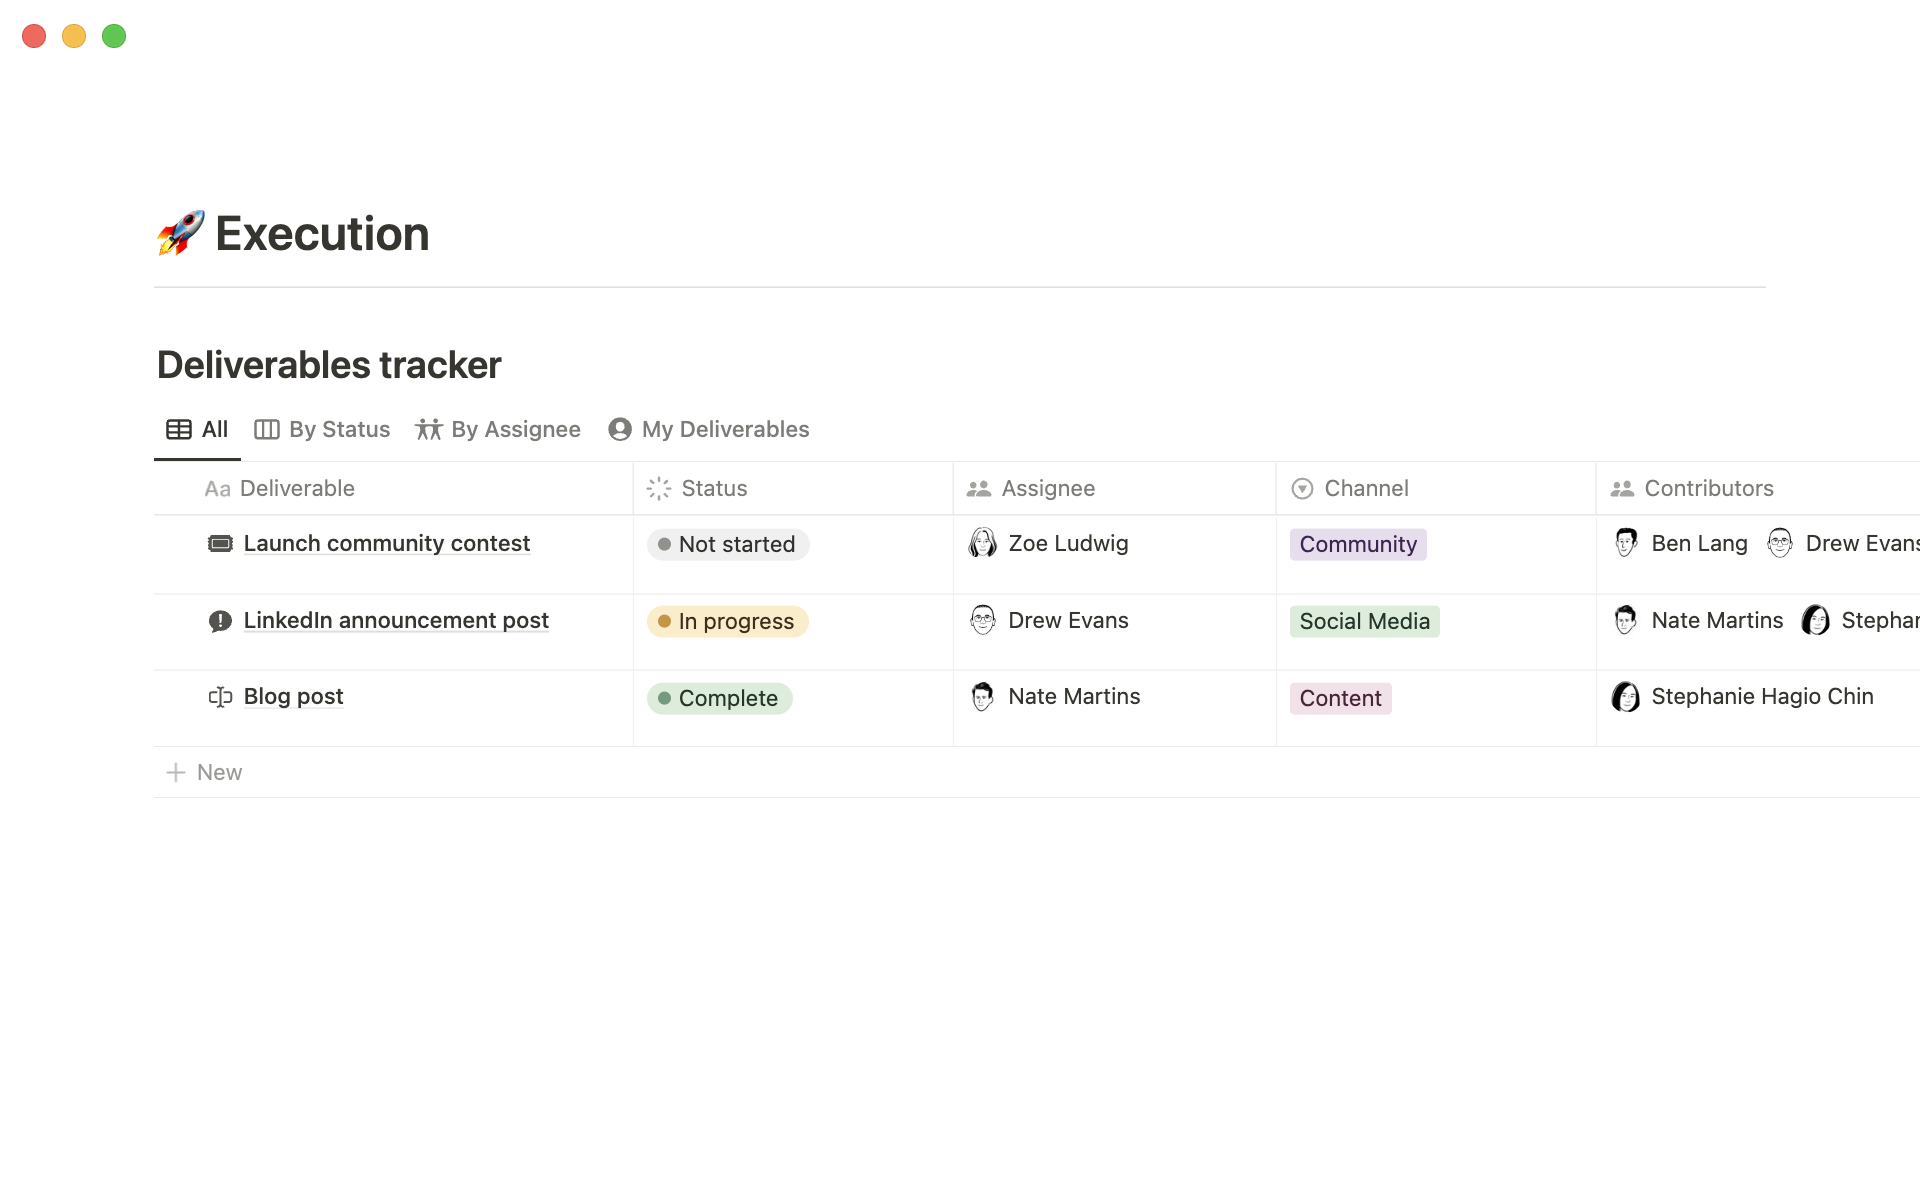 A deliverables tracker helps to organize what needs to happen (and by whom) in order to launch a campaign successfully.